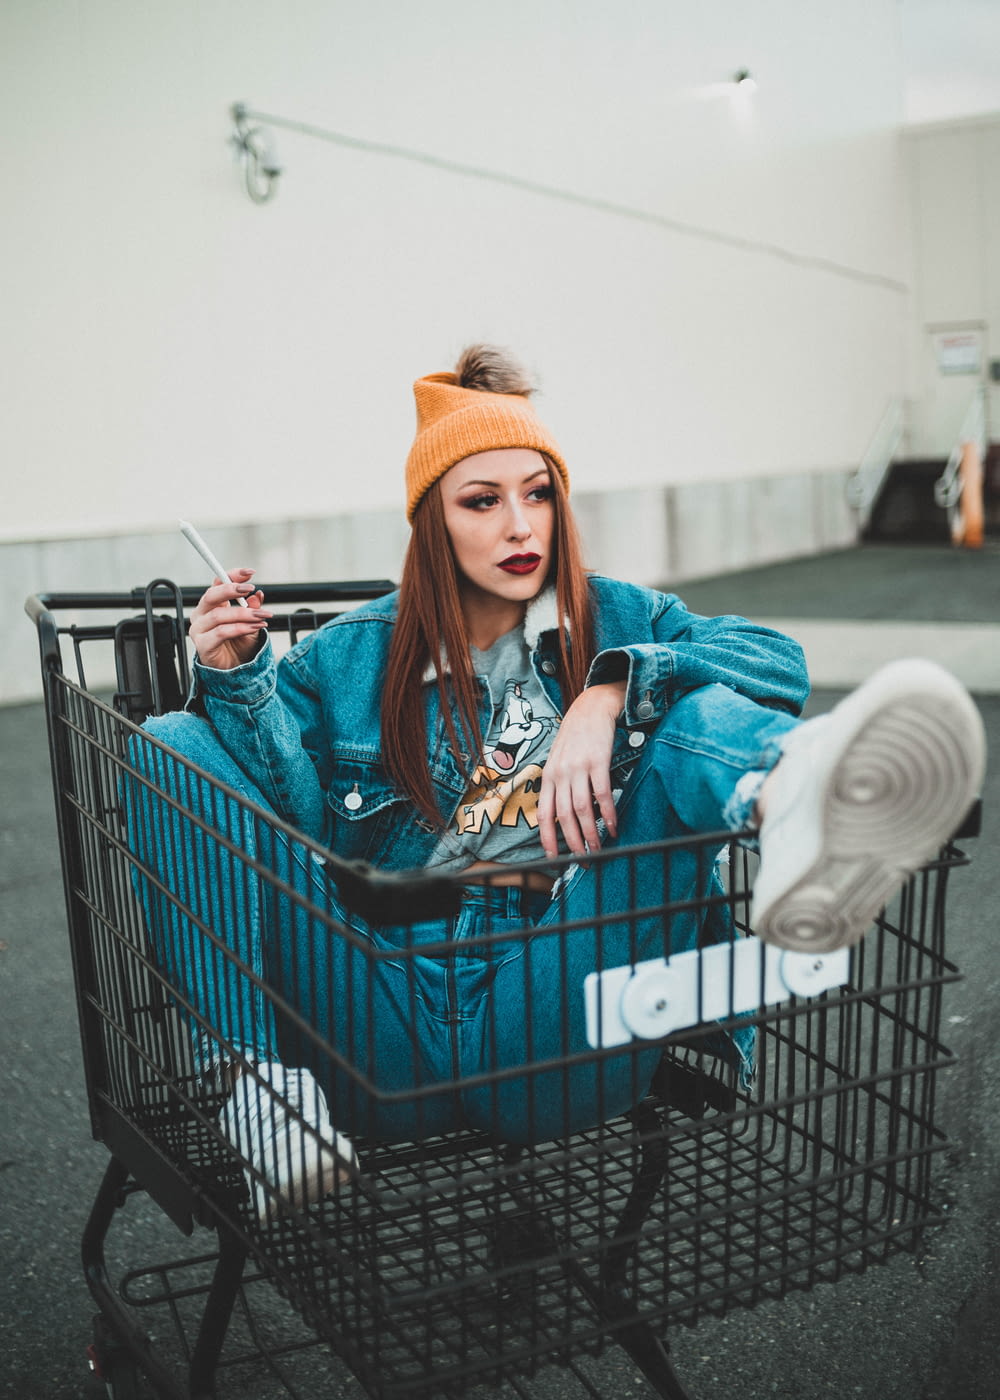 woman in blue jacket and orange knit cap sitting on shopping cart